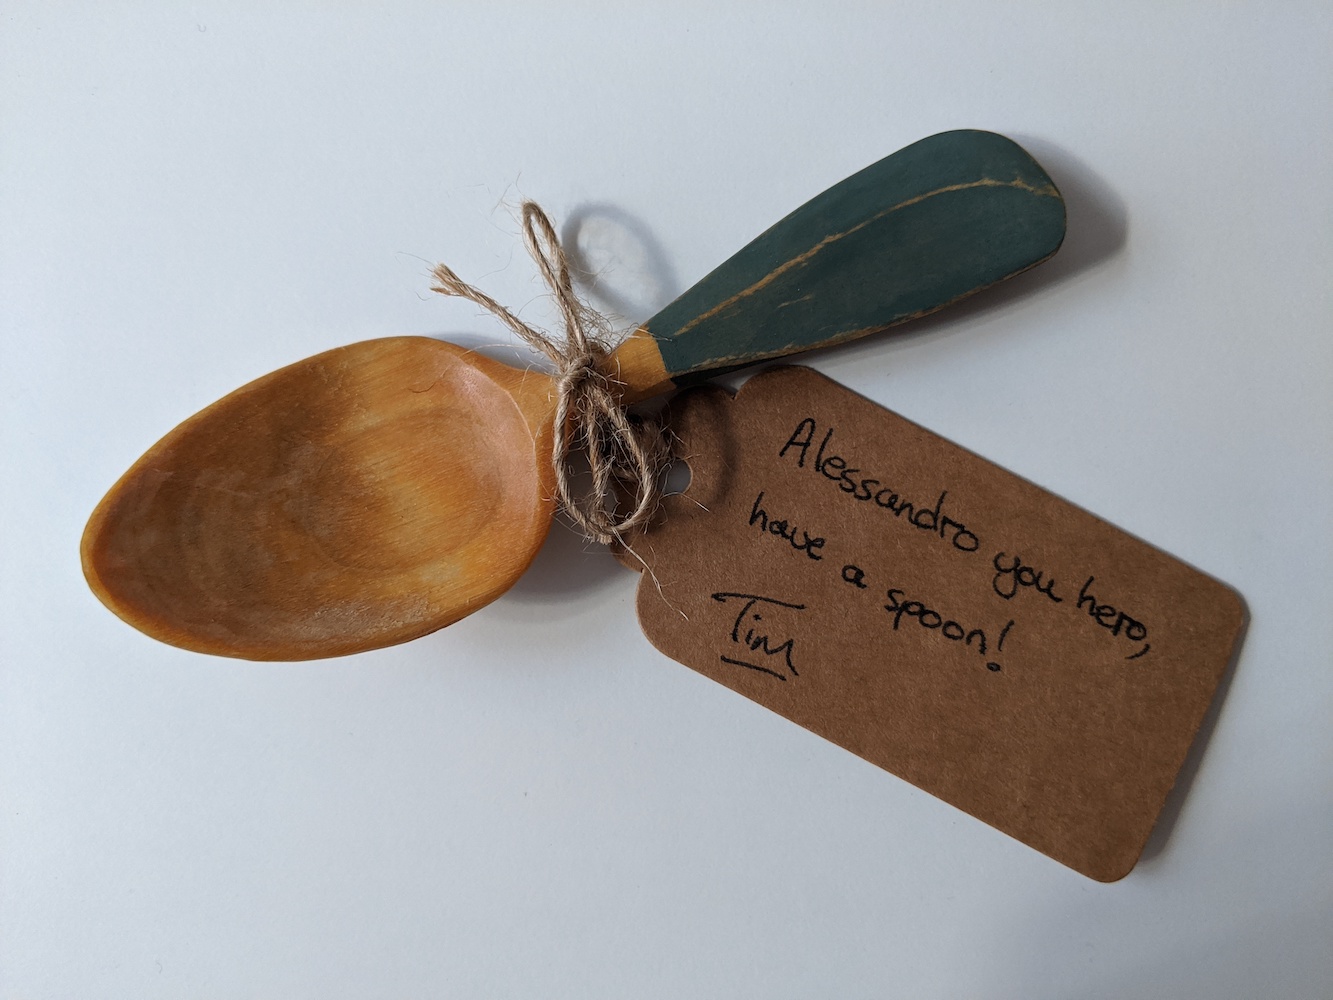 Hand-crafted wooden spoon